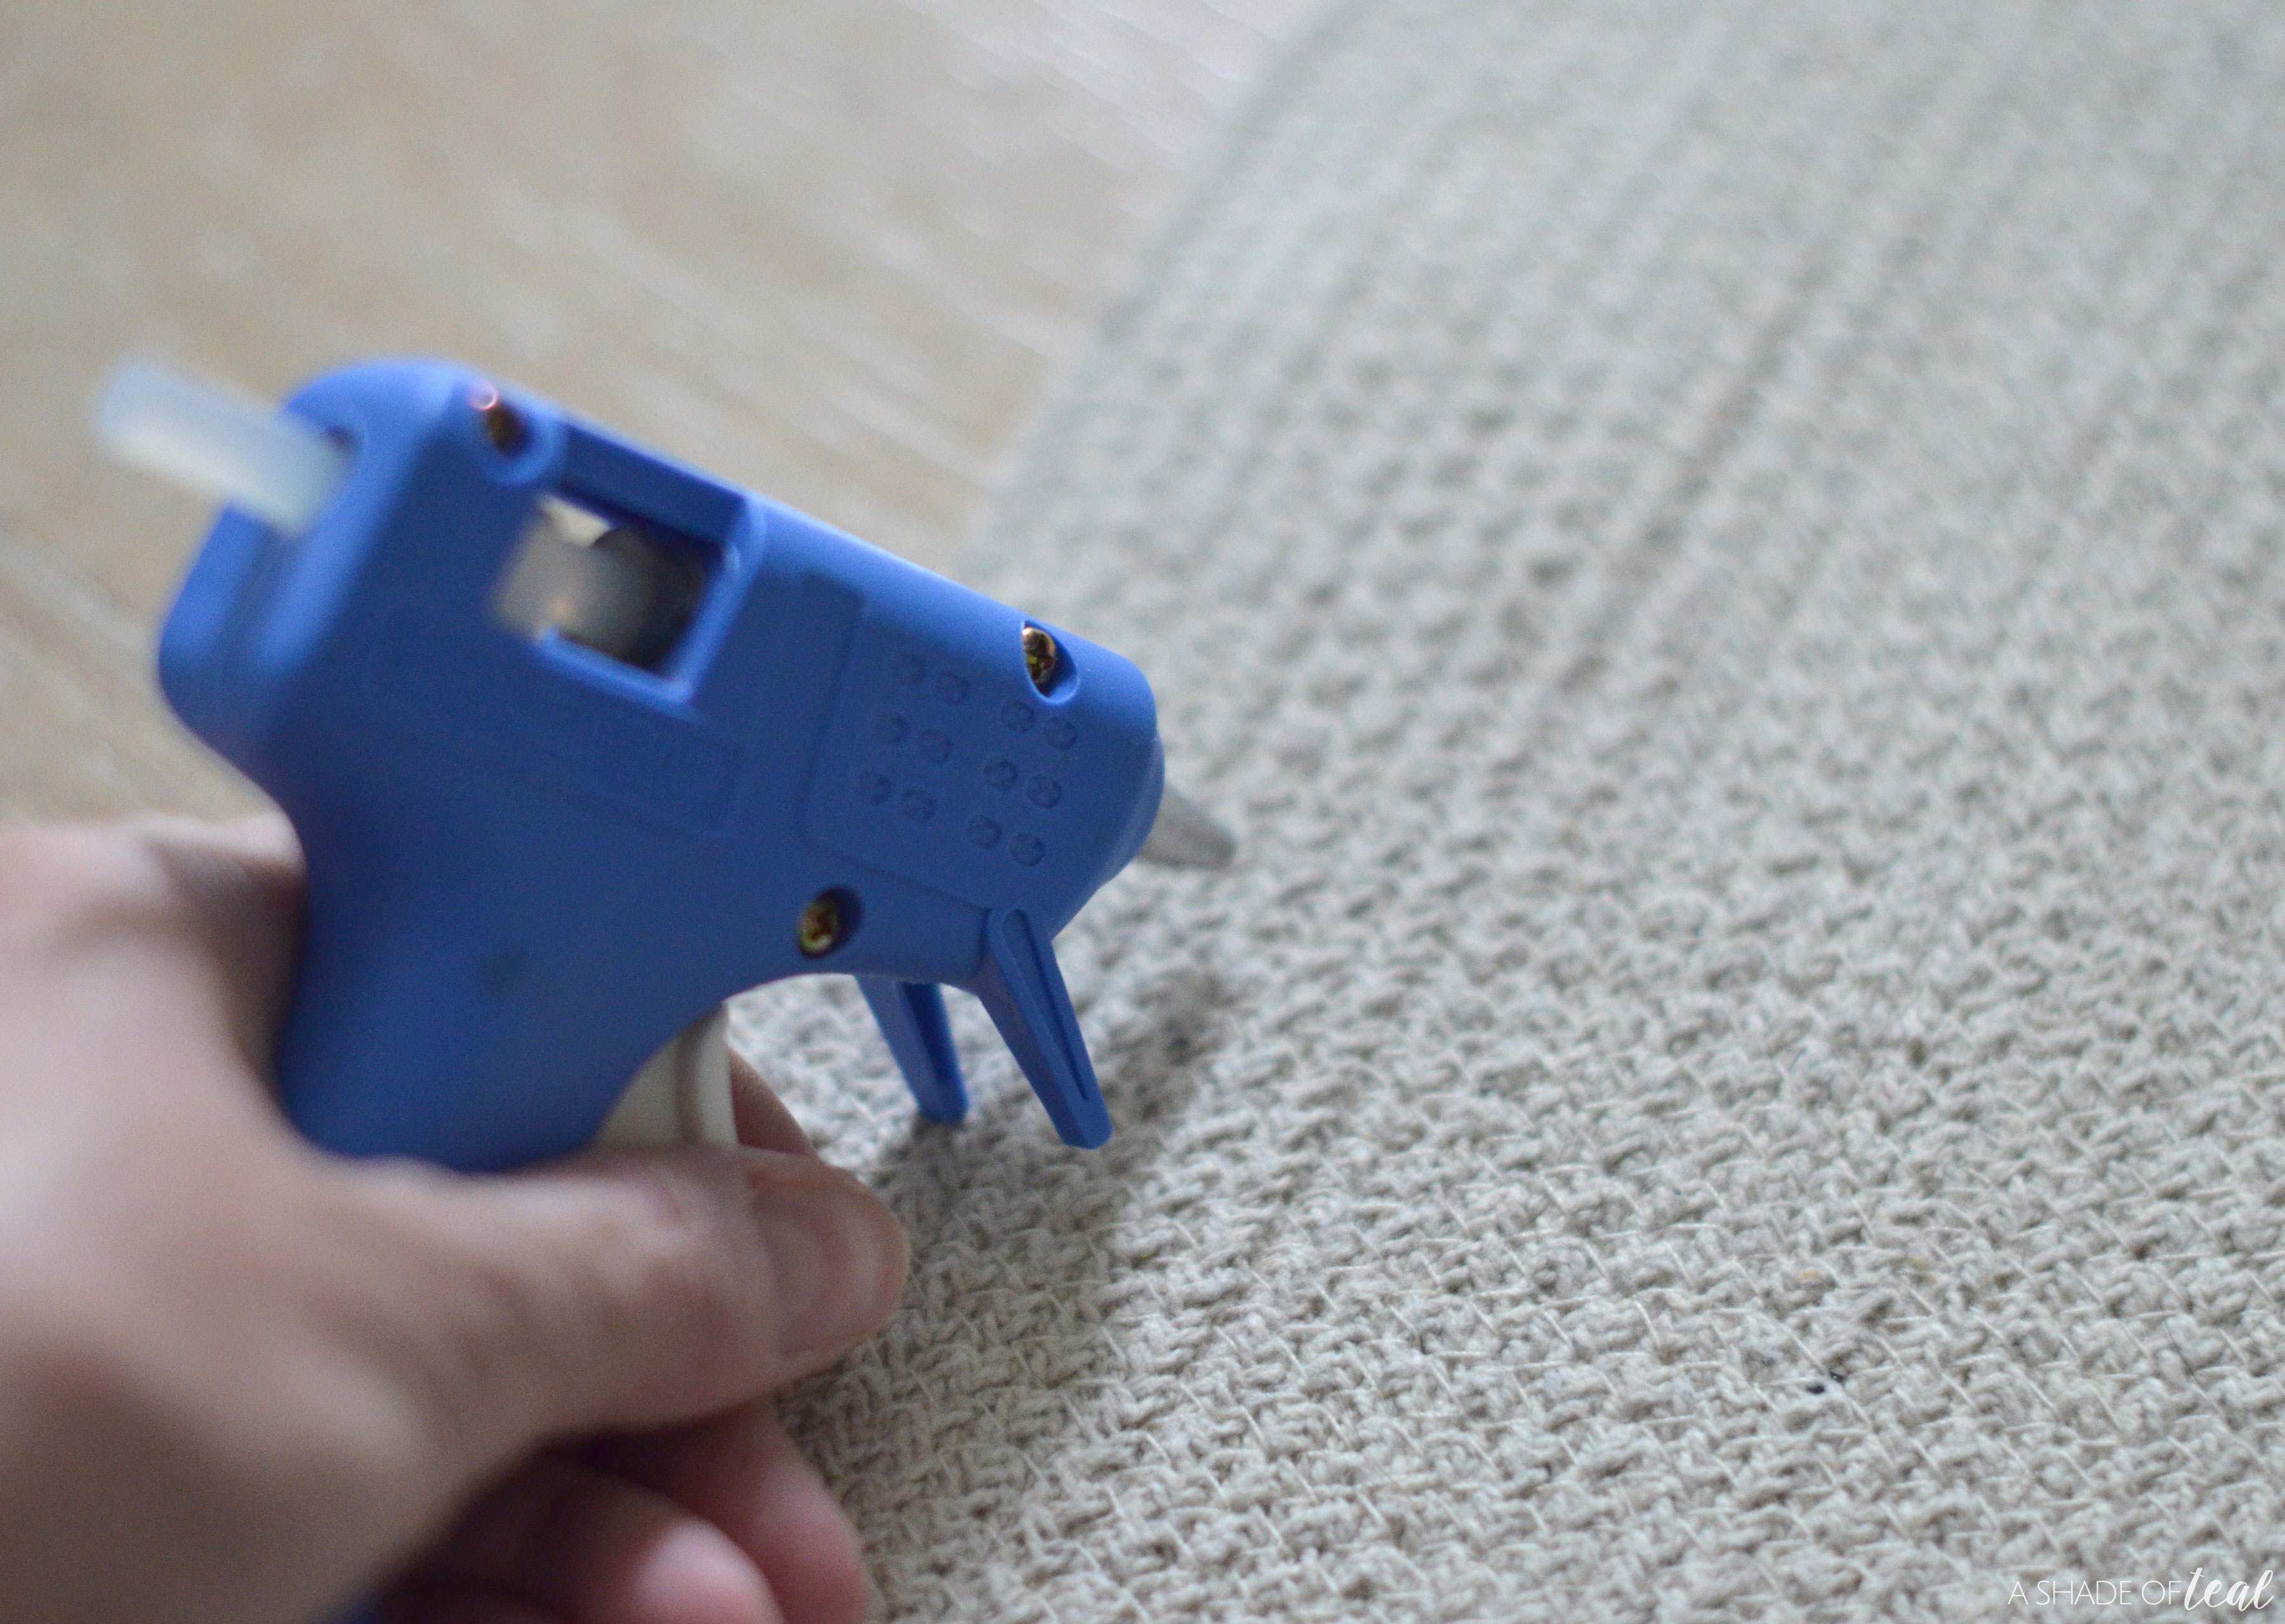 Make Any Rug Non-Slip with this Simple Trick